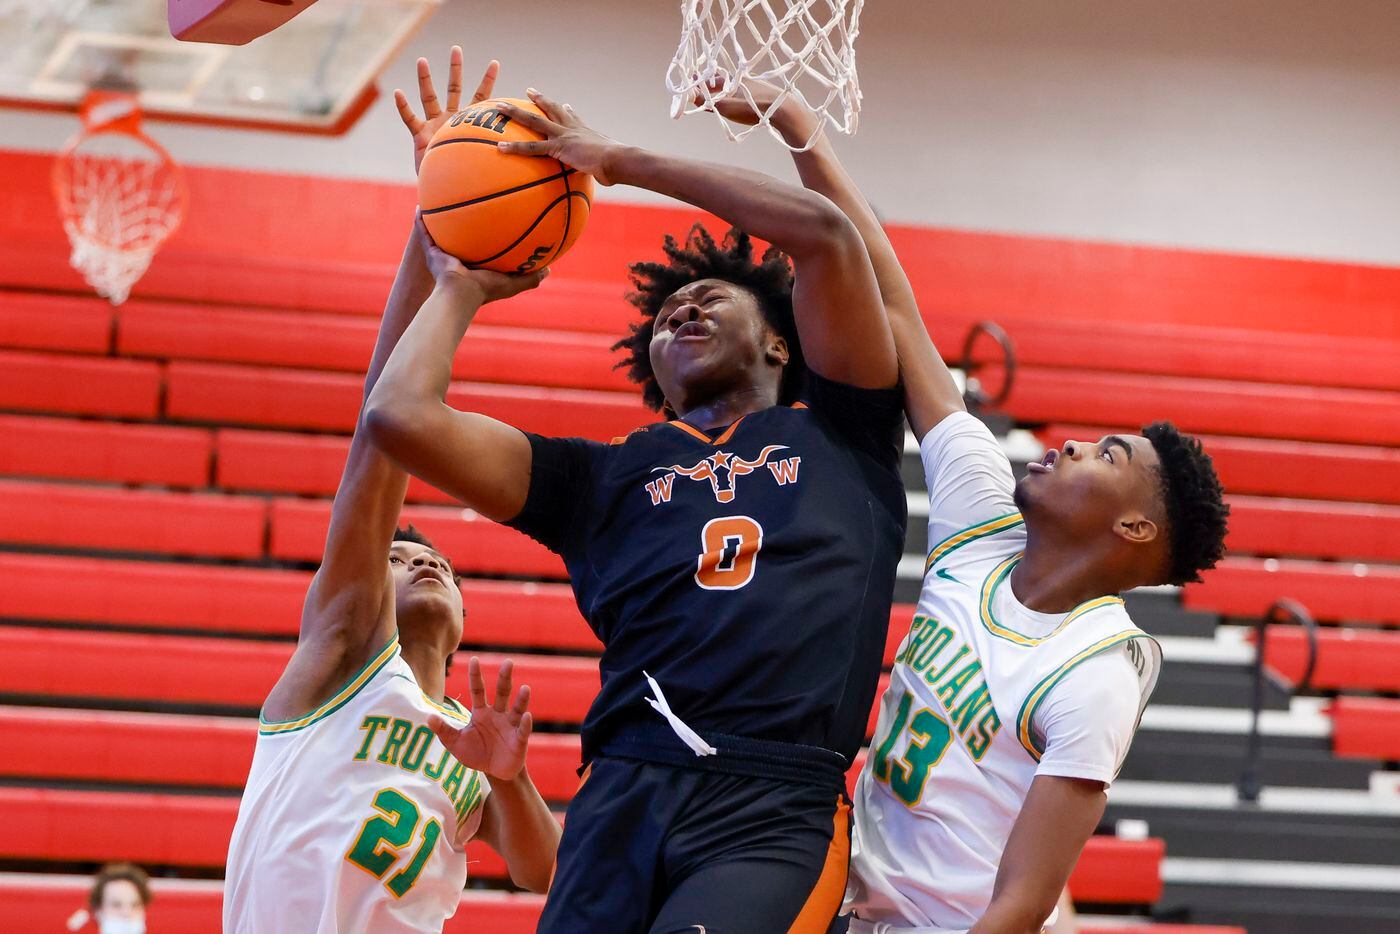 W.T. White forward Dre Cole (0) attempts a layup between Madison forwards Spencer McLeod (21) and Quintin Spencer (13) during the second quarter of a Dallas ISD Holiday Invitational basketball tournament game at Woodrow Wilson High School in Dallas, Tuesday, Dec. 28, 2021.